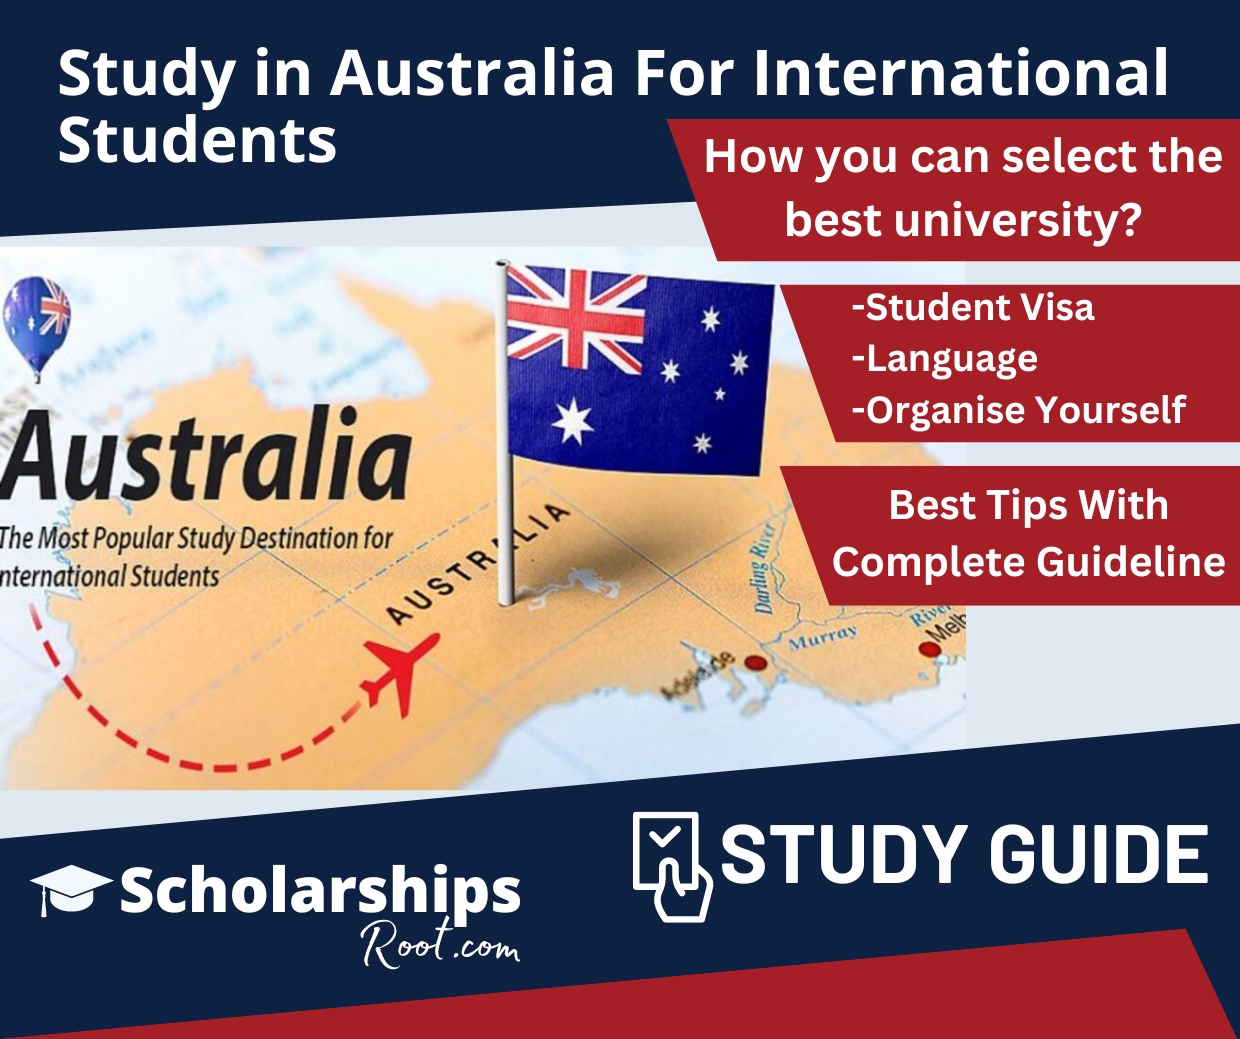 Study in Australia For International Students Best Helping Guidelines And Tips